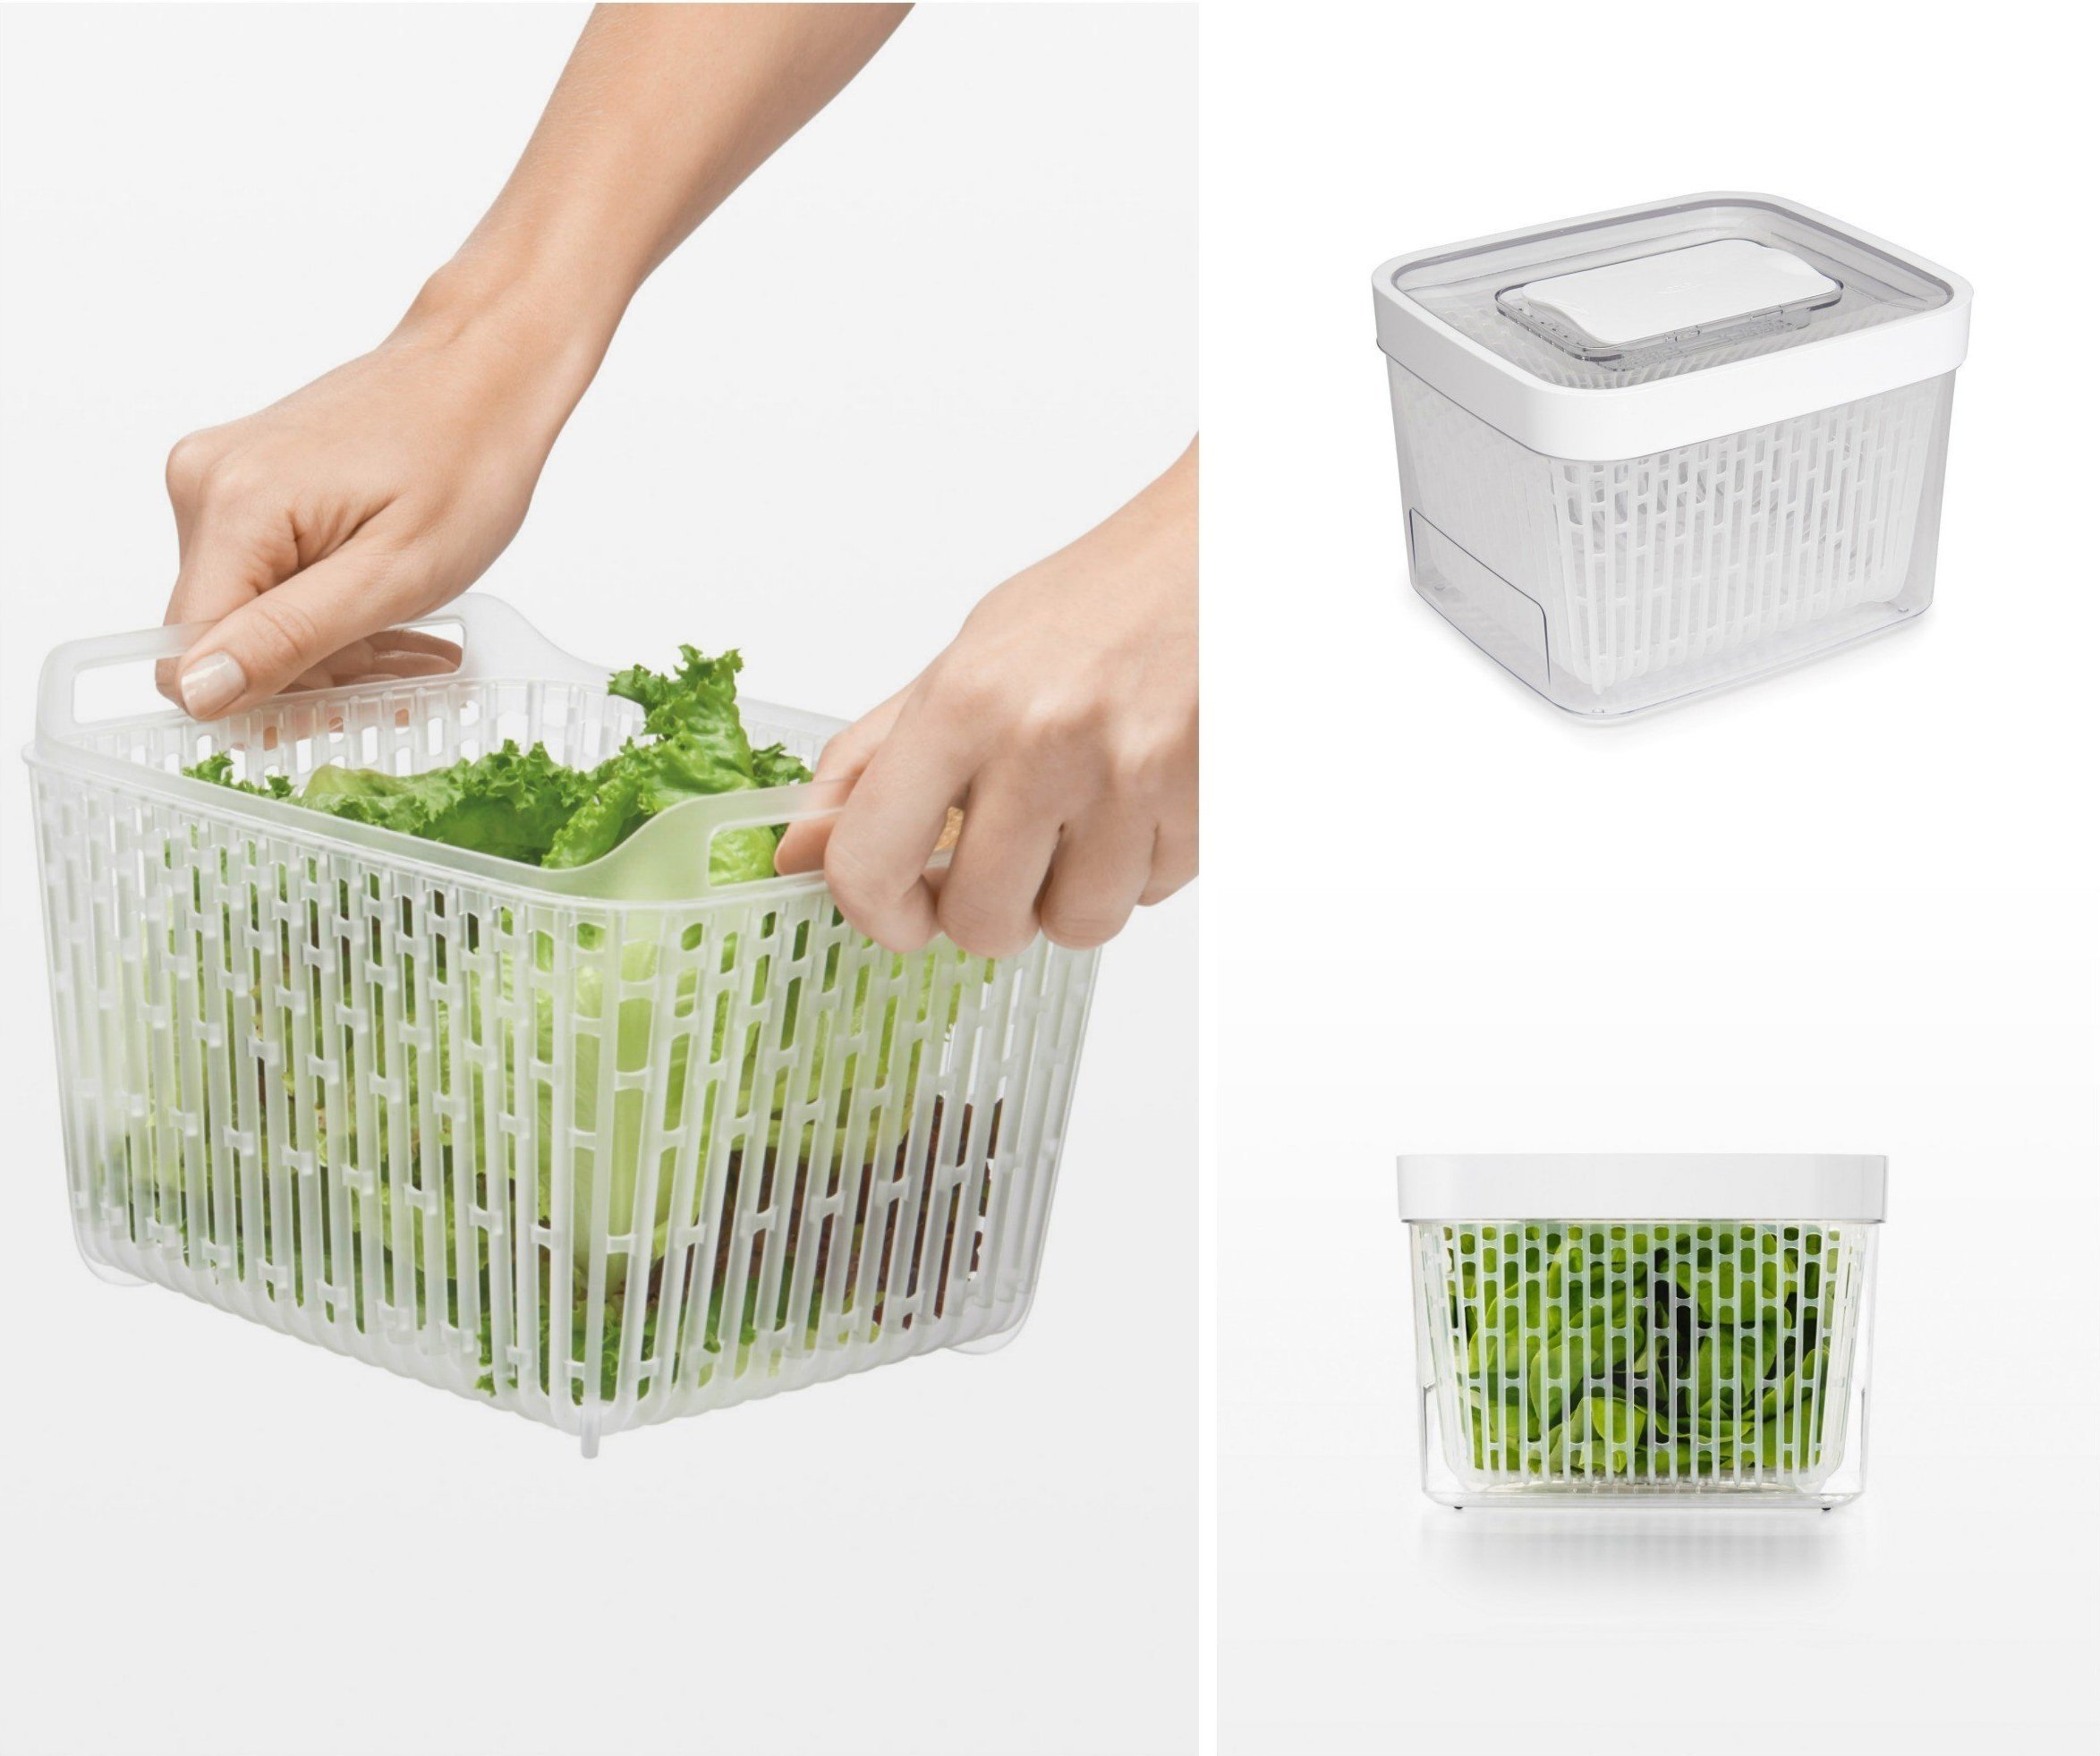 https://3fa-media.com/oxo/oxo-greensaver-fruit-and-vegetable-container-with-carbon-filter__green-2-s2500x2500.jpg